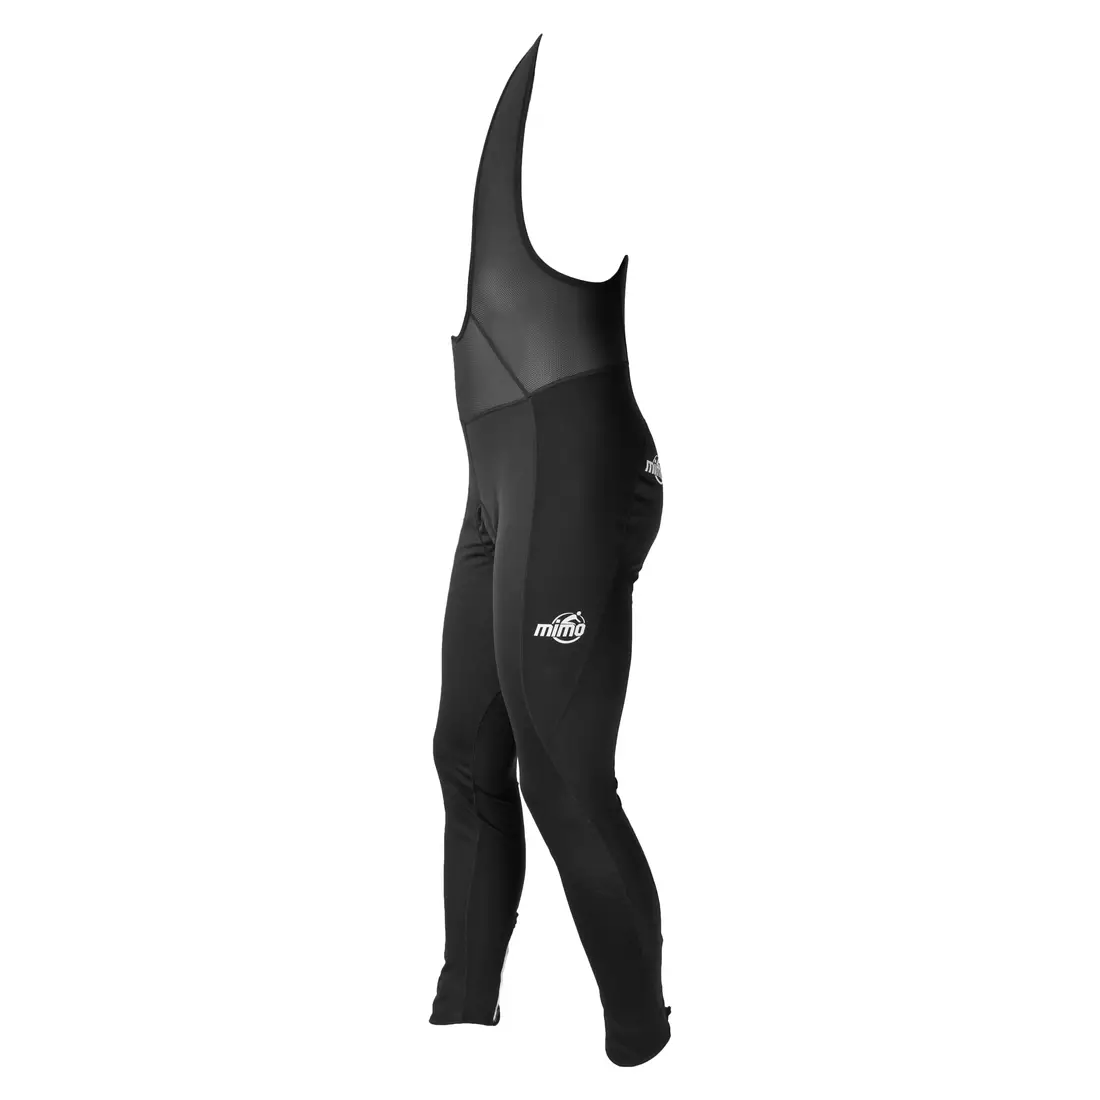 MikeSPORT CREEK softshell winter cycling pants with insert